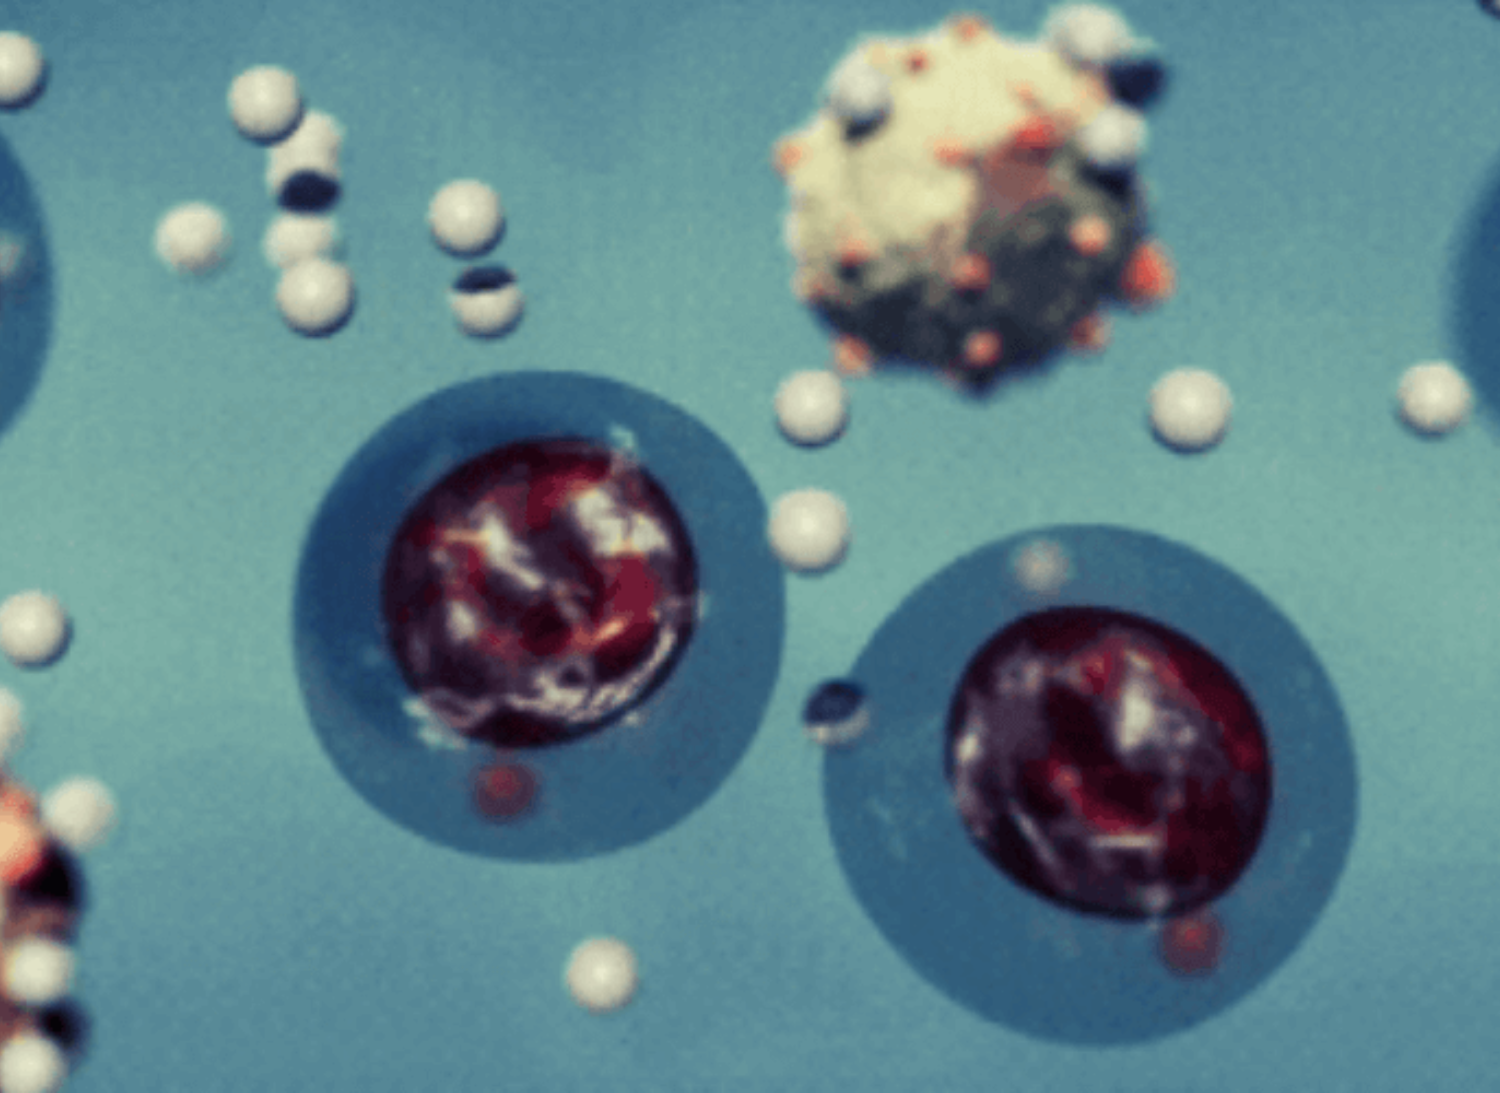 illustration of how the drug protects blood cells